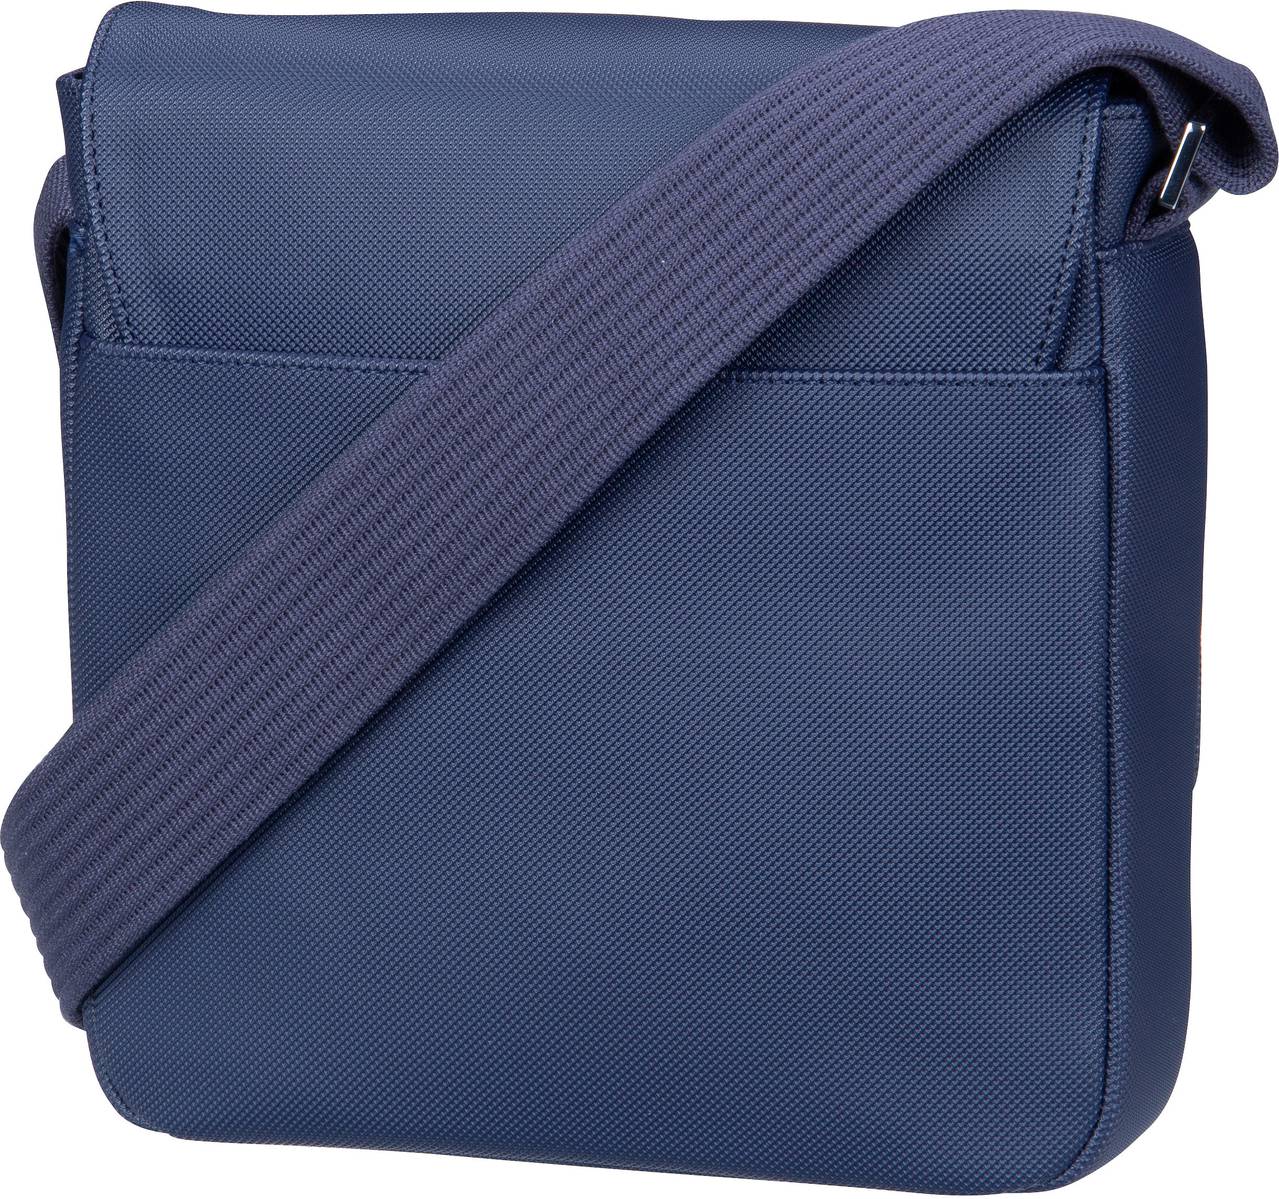 Lacoste Men's Classic Crossover Bag 2341 - Navy